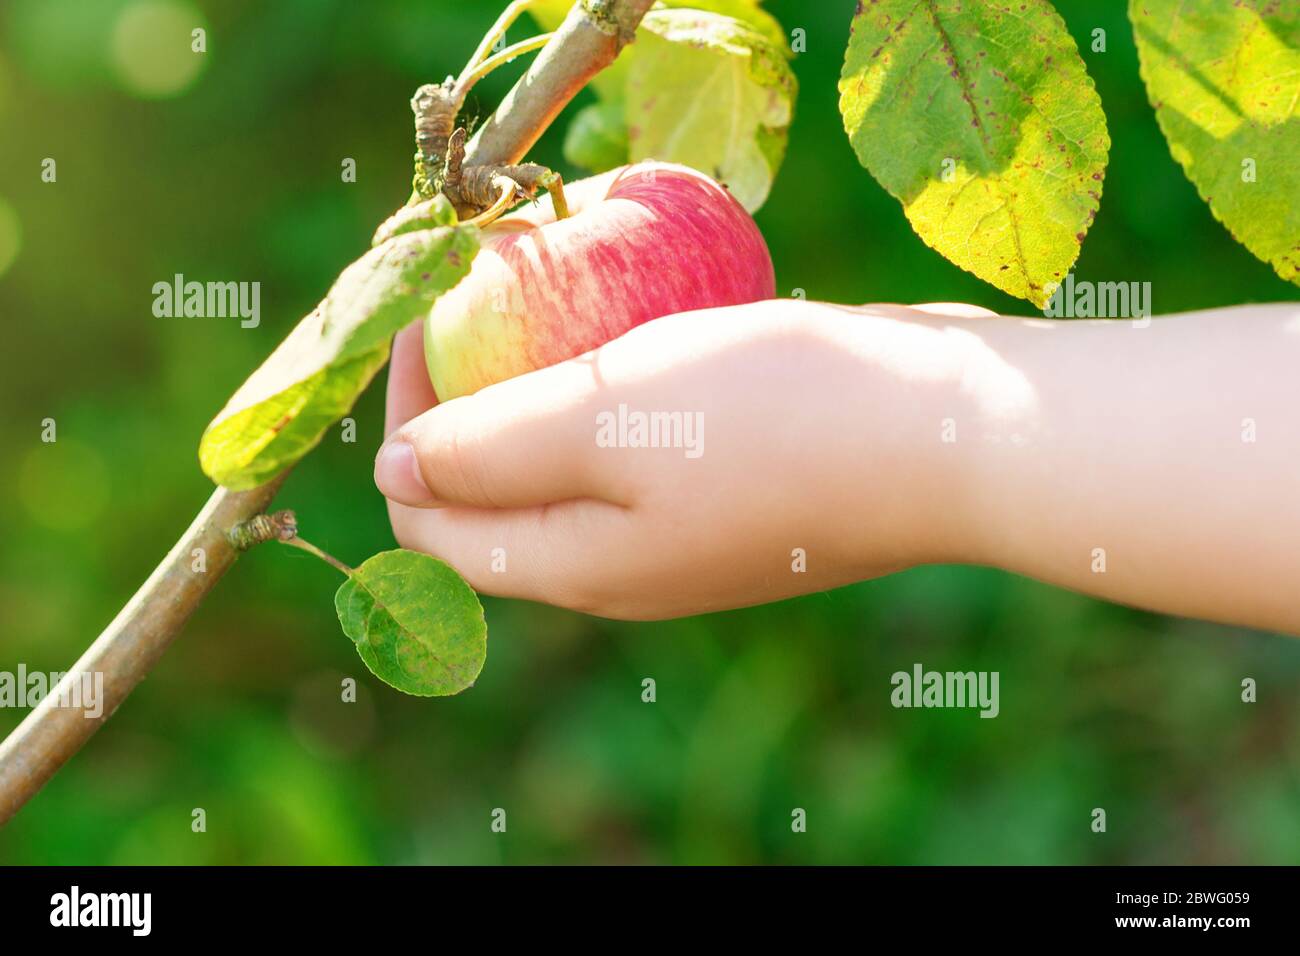 Hand of child picking red ripe apple from tree branch in the garden. Stock Photo